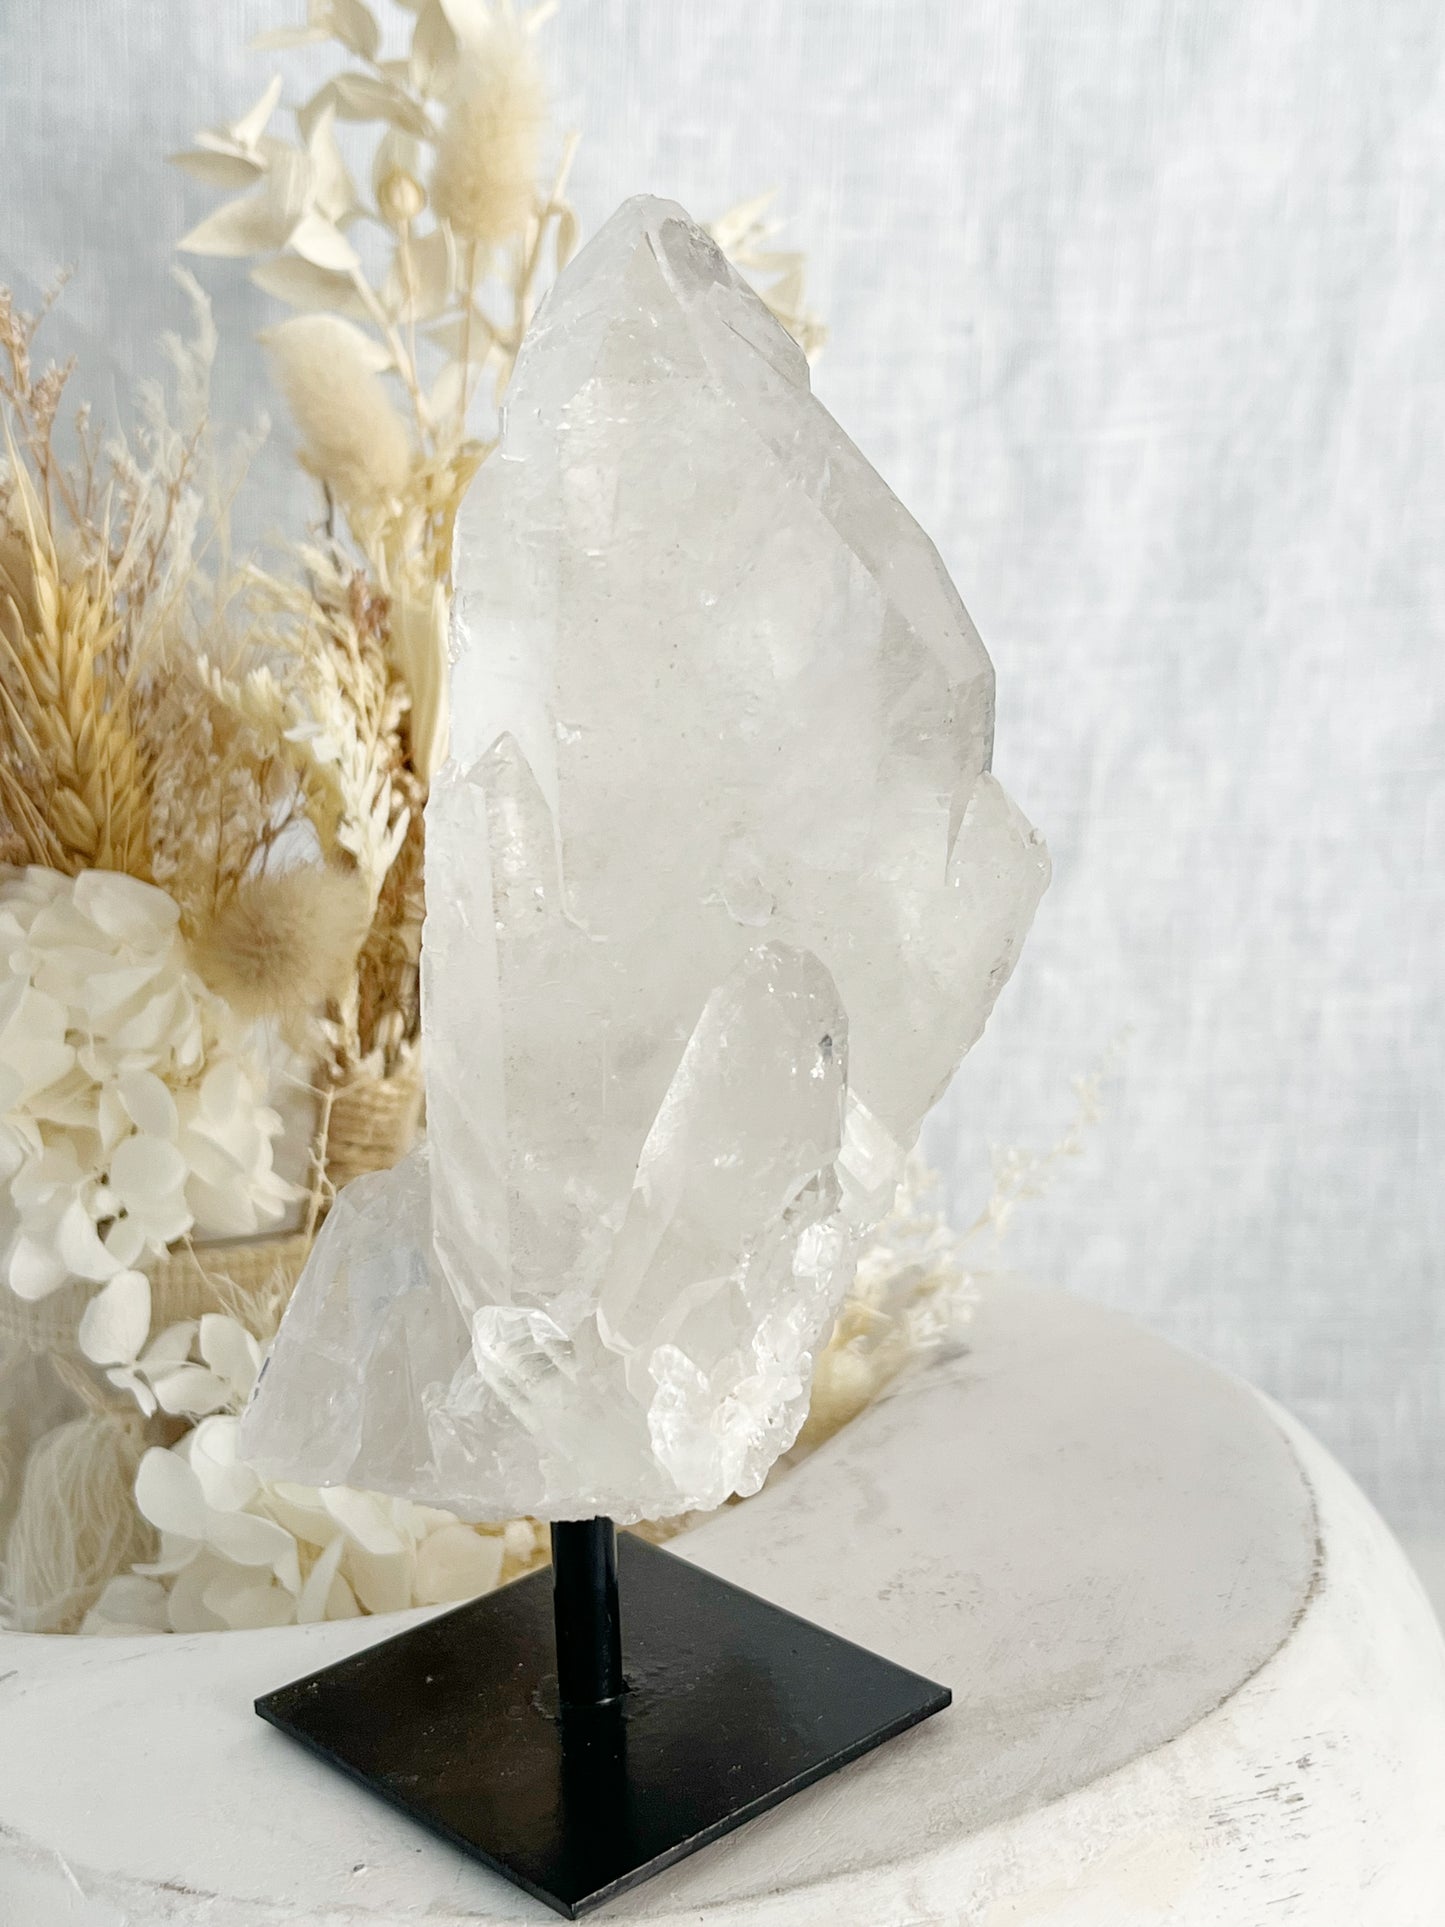 CLEAR QUARTZ CLUSTER ON STAND, STONED AND SAGED AUSTRALIA